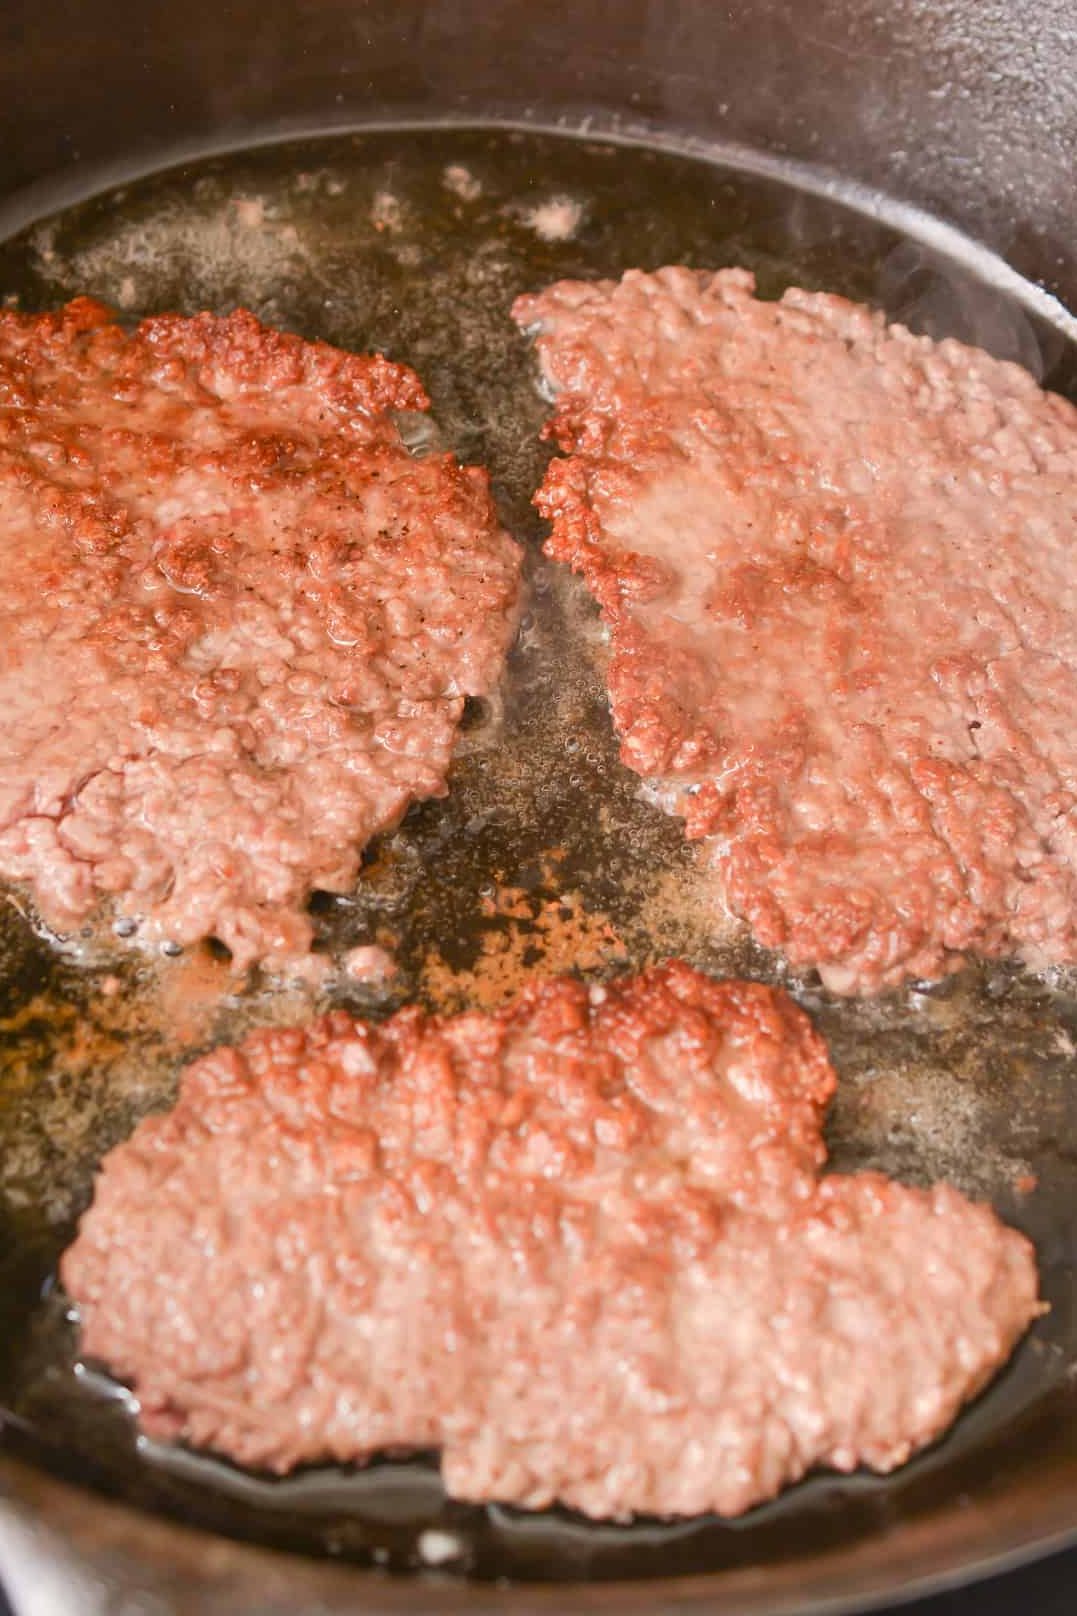 Add the cube steaks to the heated skillet, and sear well on all sides.